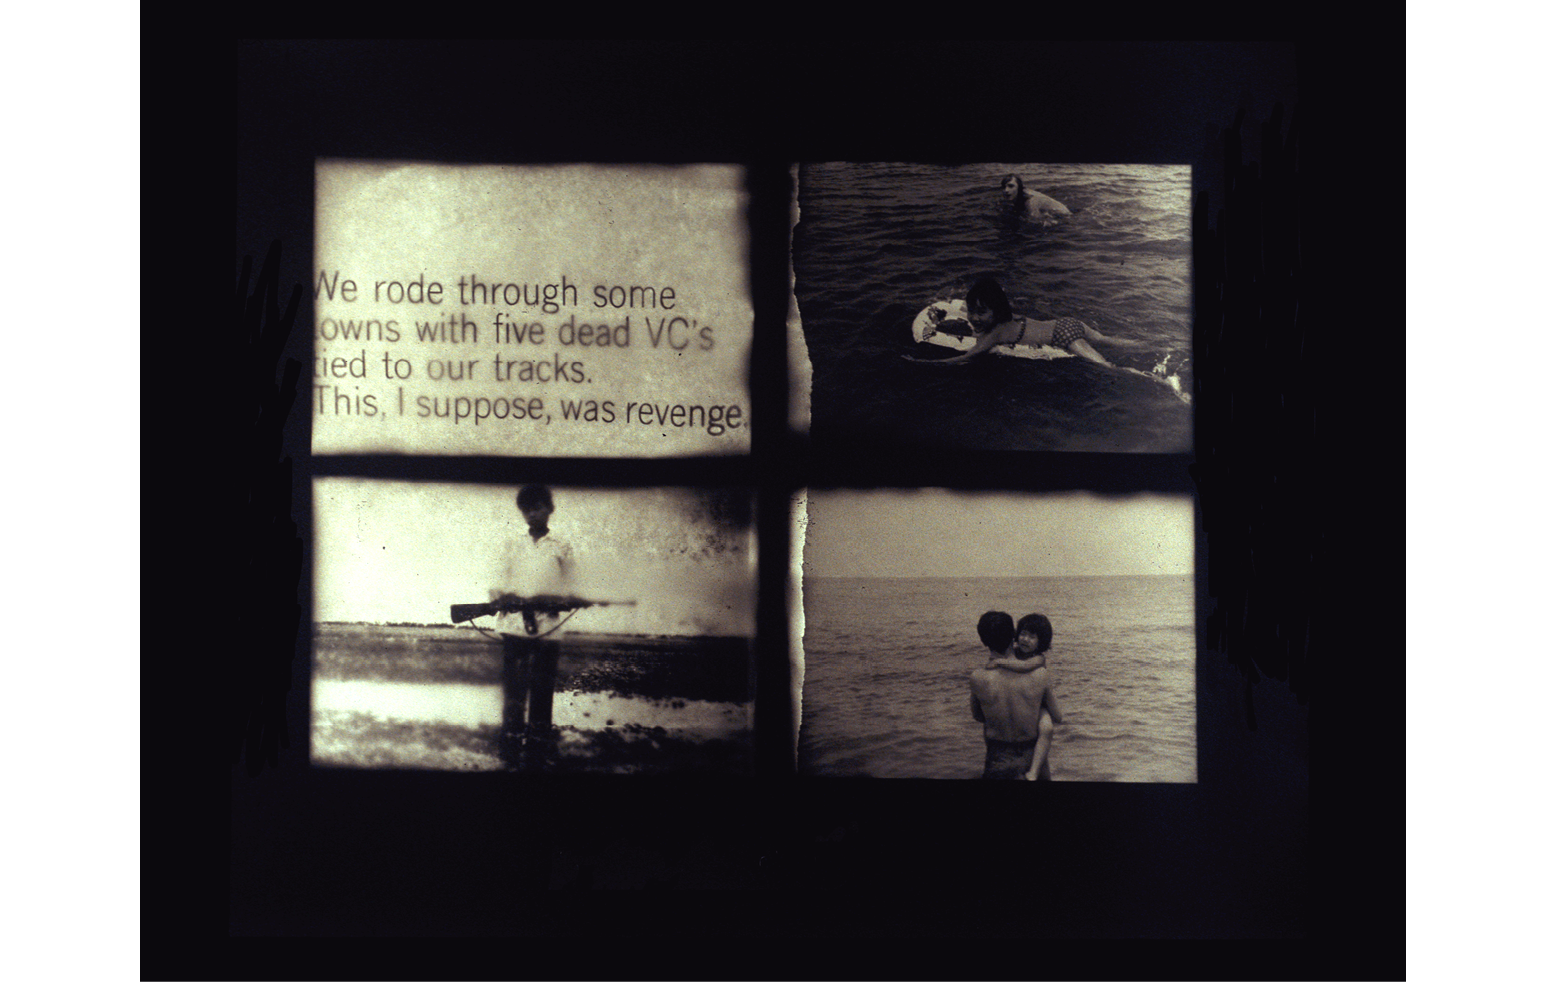 Four aged horizontal images in a grid. The first is text reads, ""We rode through some tows with five dead VC's tied to our tracks. This, I suppose, was revenge."" The second image shows a young and little girl separately swimming in water. The third image shows a young body standing on a beach, with a shot gun in his hands. The fourth image shows a man holding a young girl in his arms as they walk into the ocean.